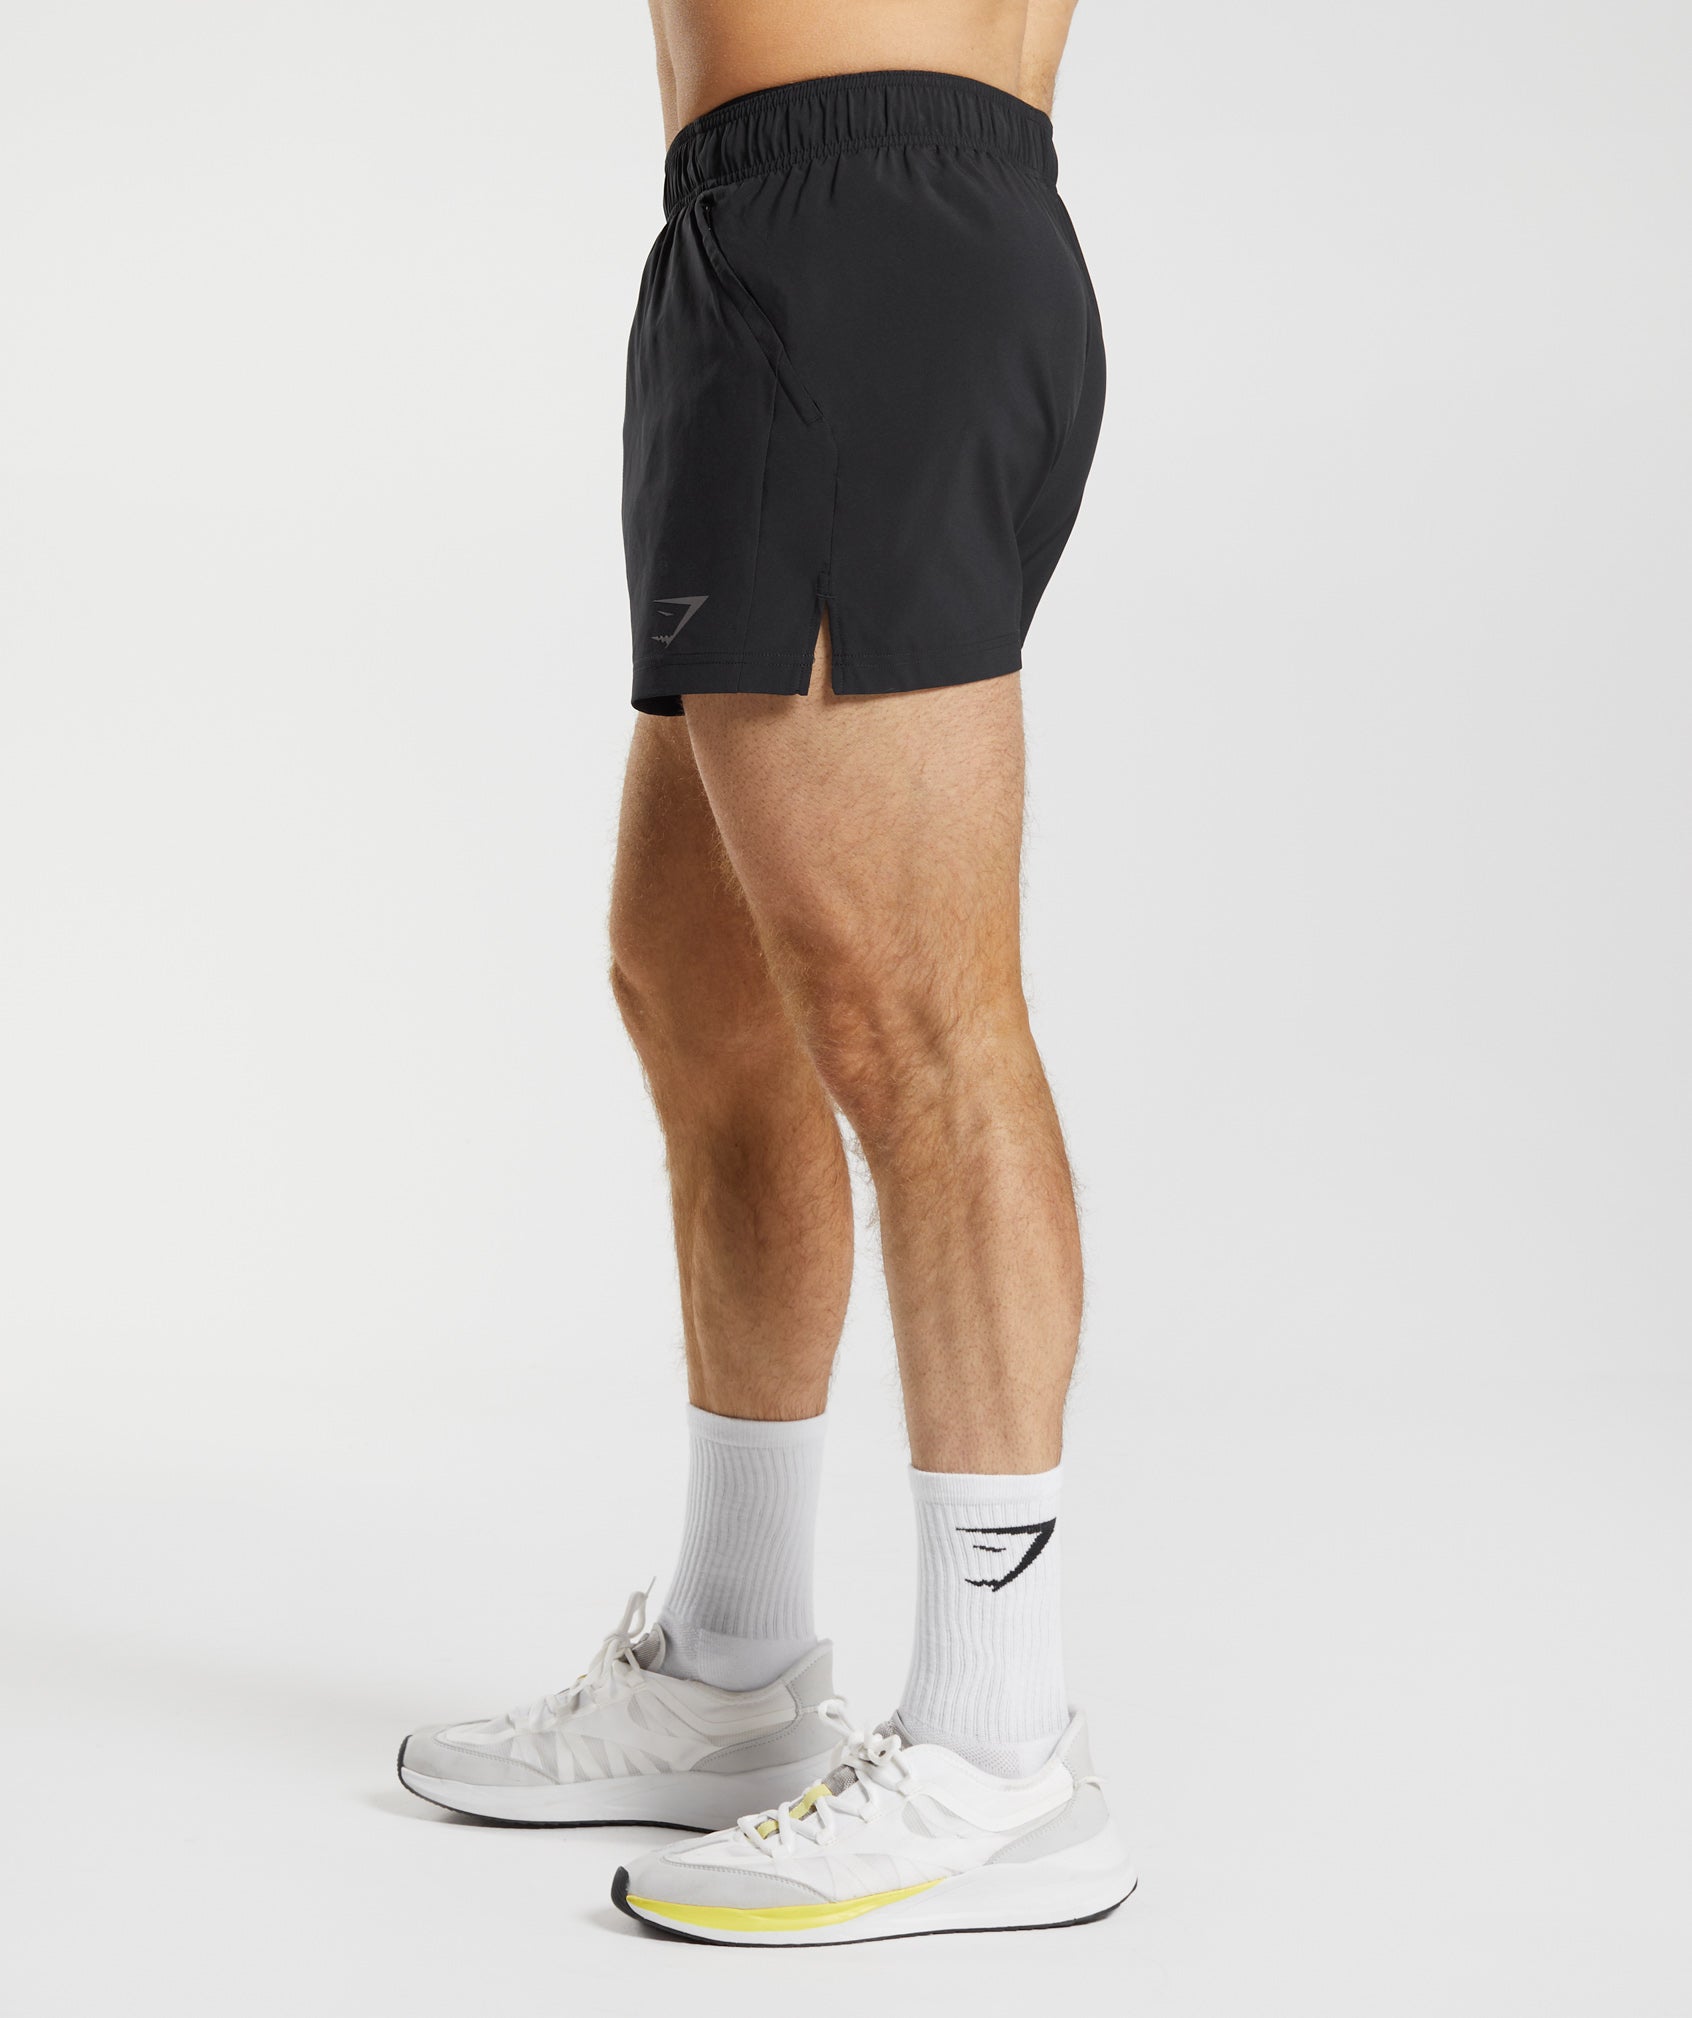 Sport 5" Shorts in Black - view 3